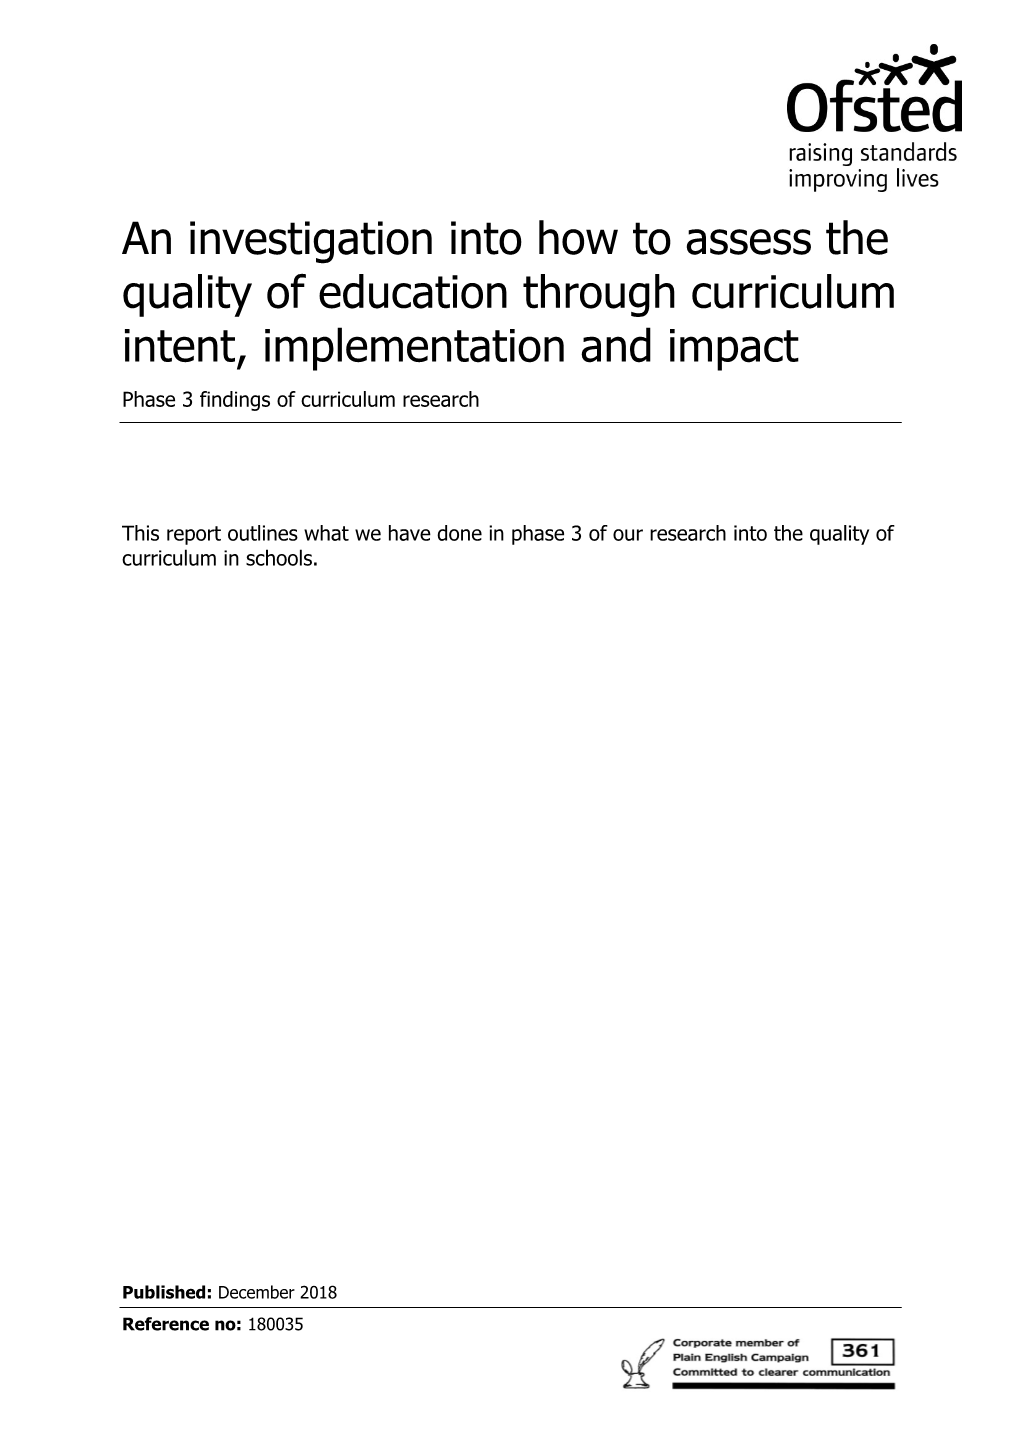 Ofsted: Assessing Intent and Implementation of Curriculum